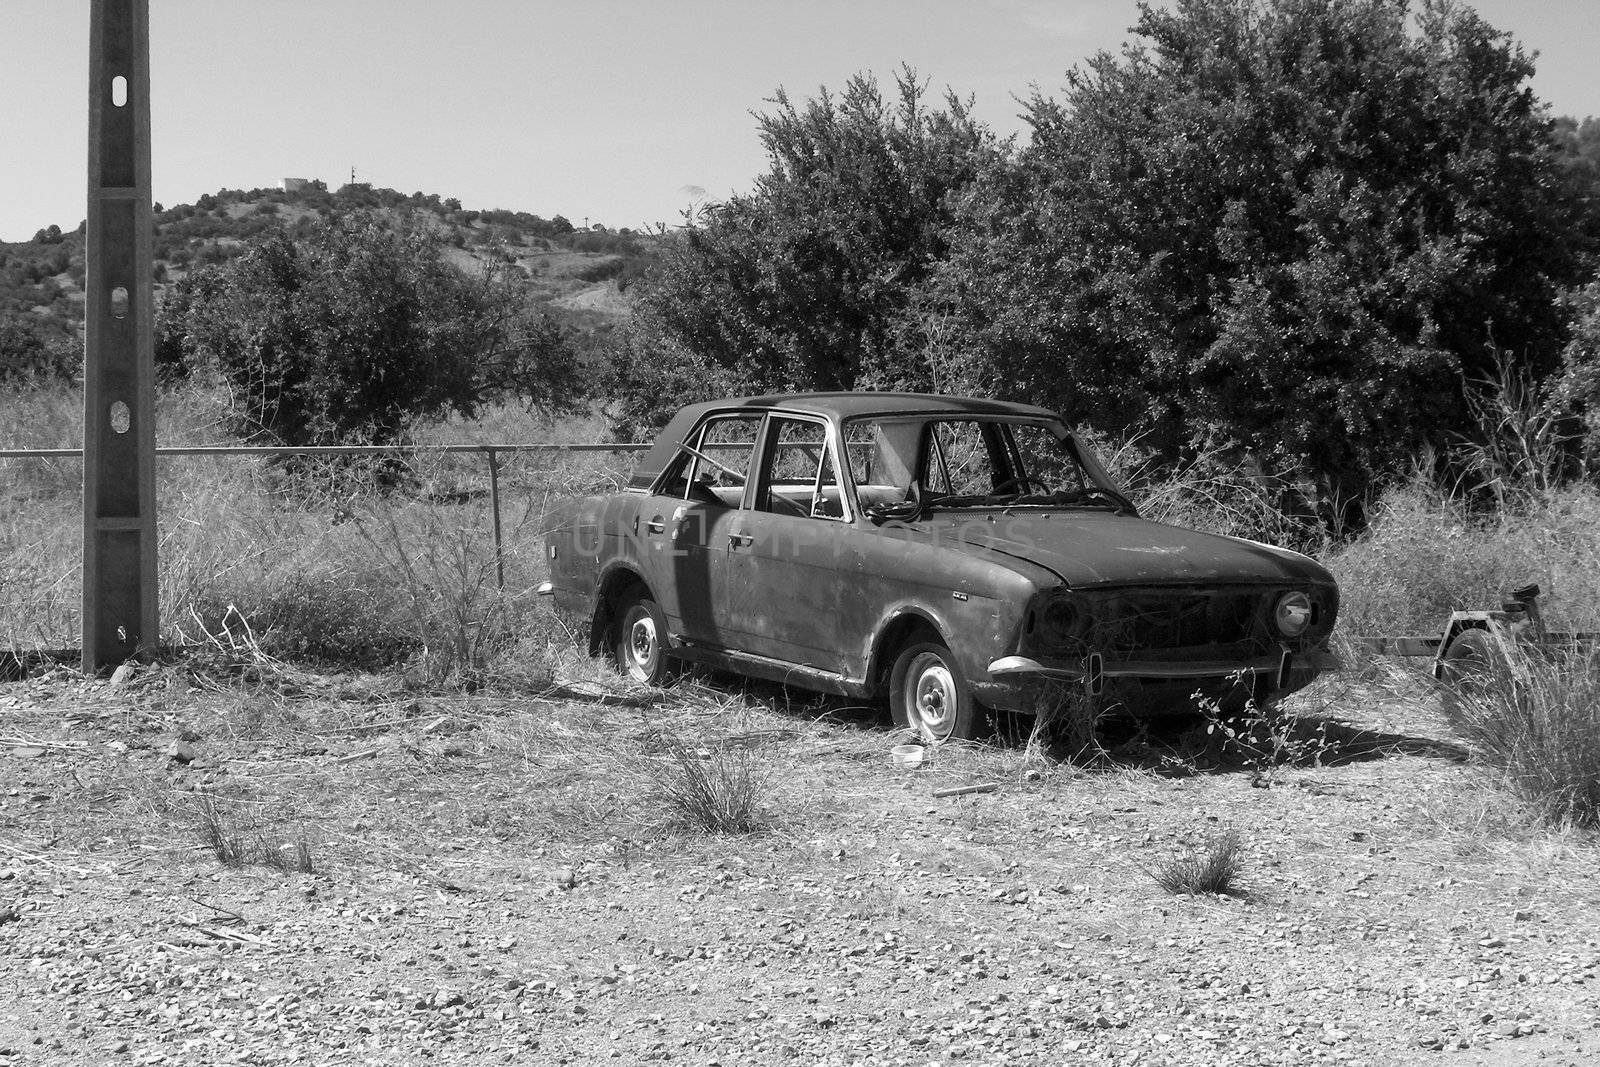 black and white image of an old vintage car wreck